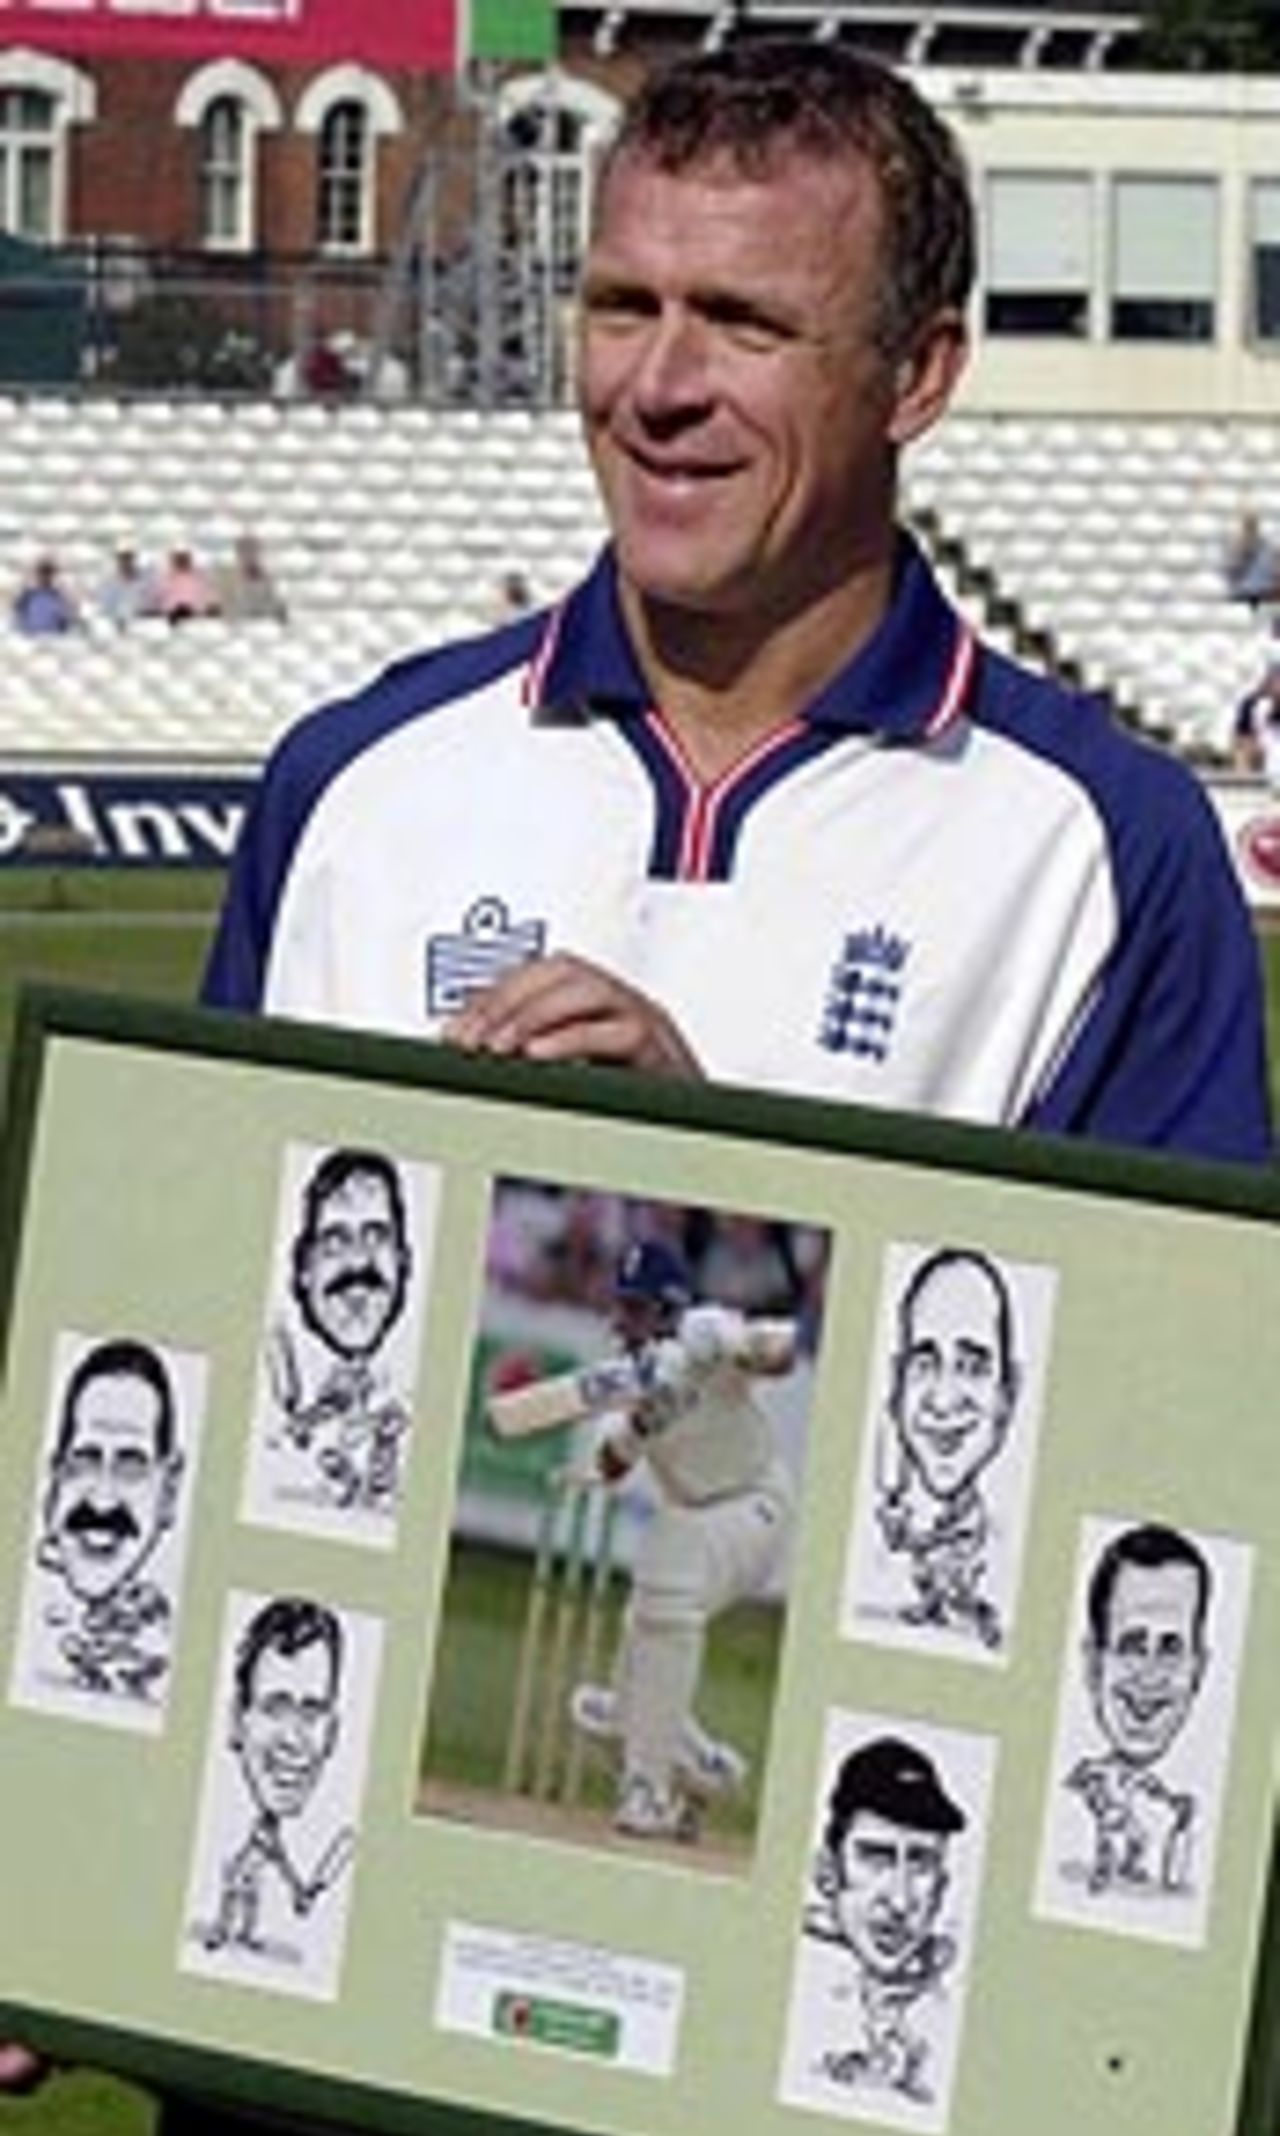 Alec Stewart and some very ropey caricatures